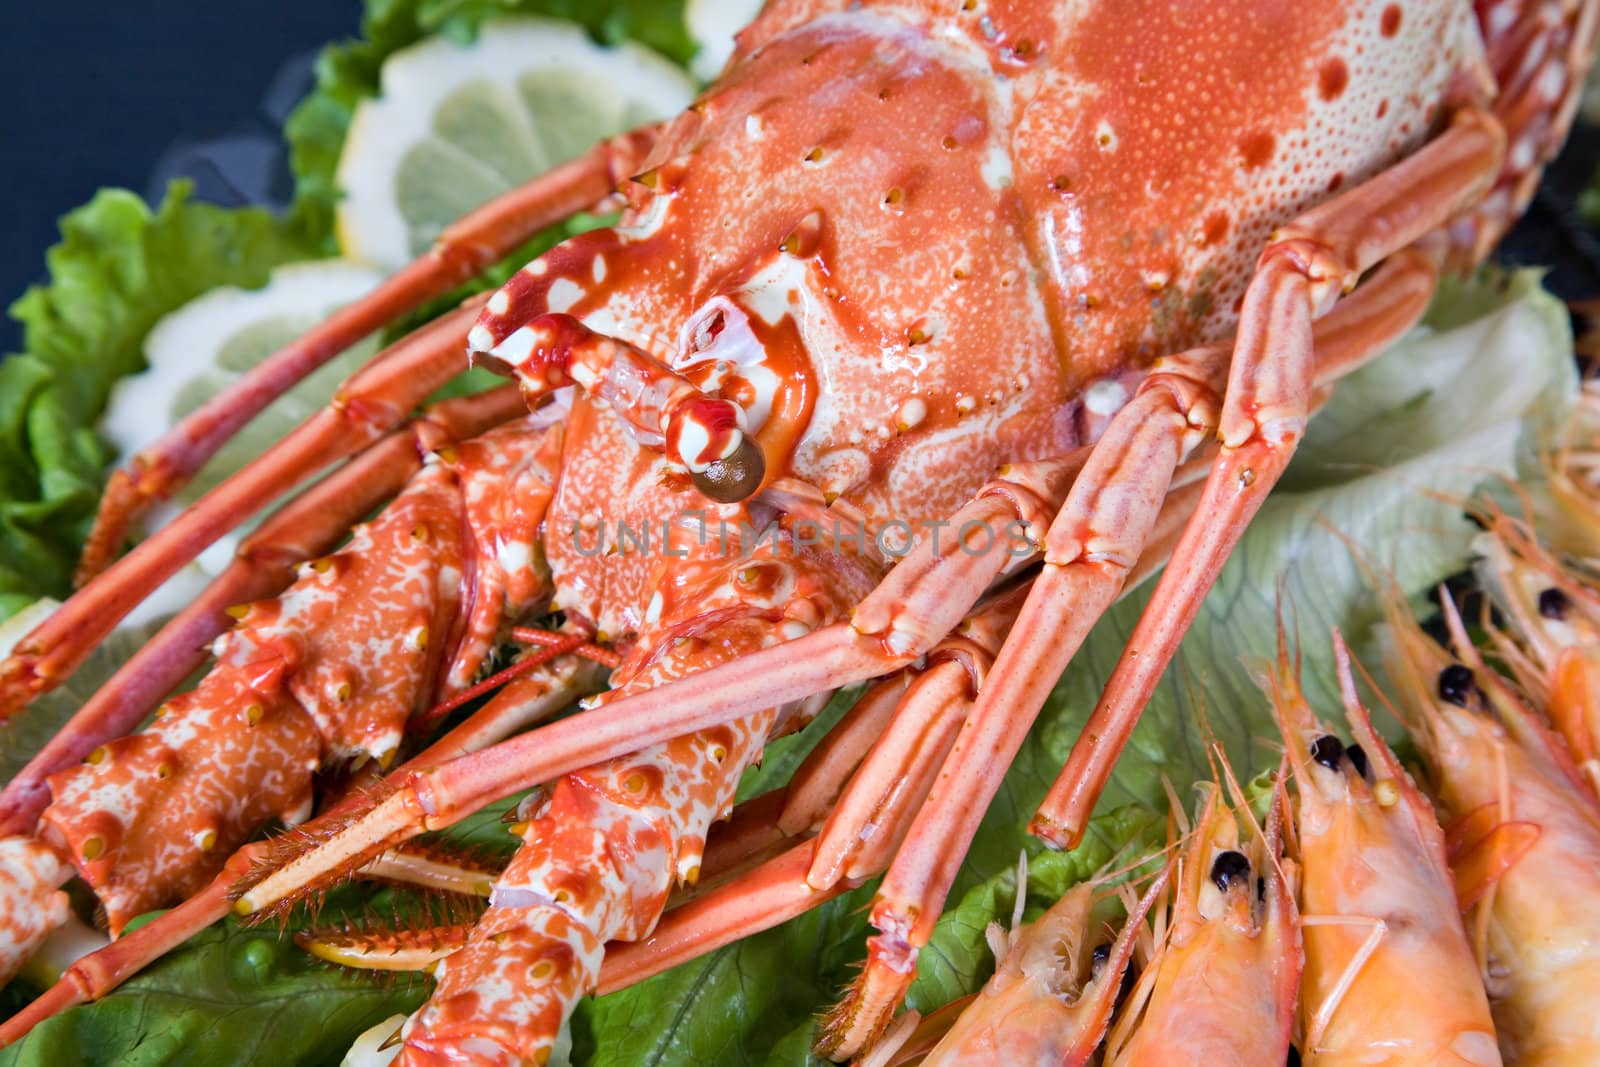 Fresh and delicious seafood - lobster and shrimp